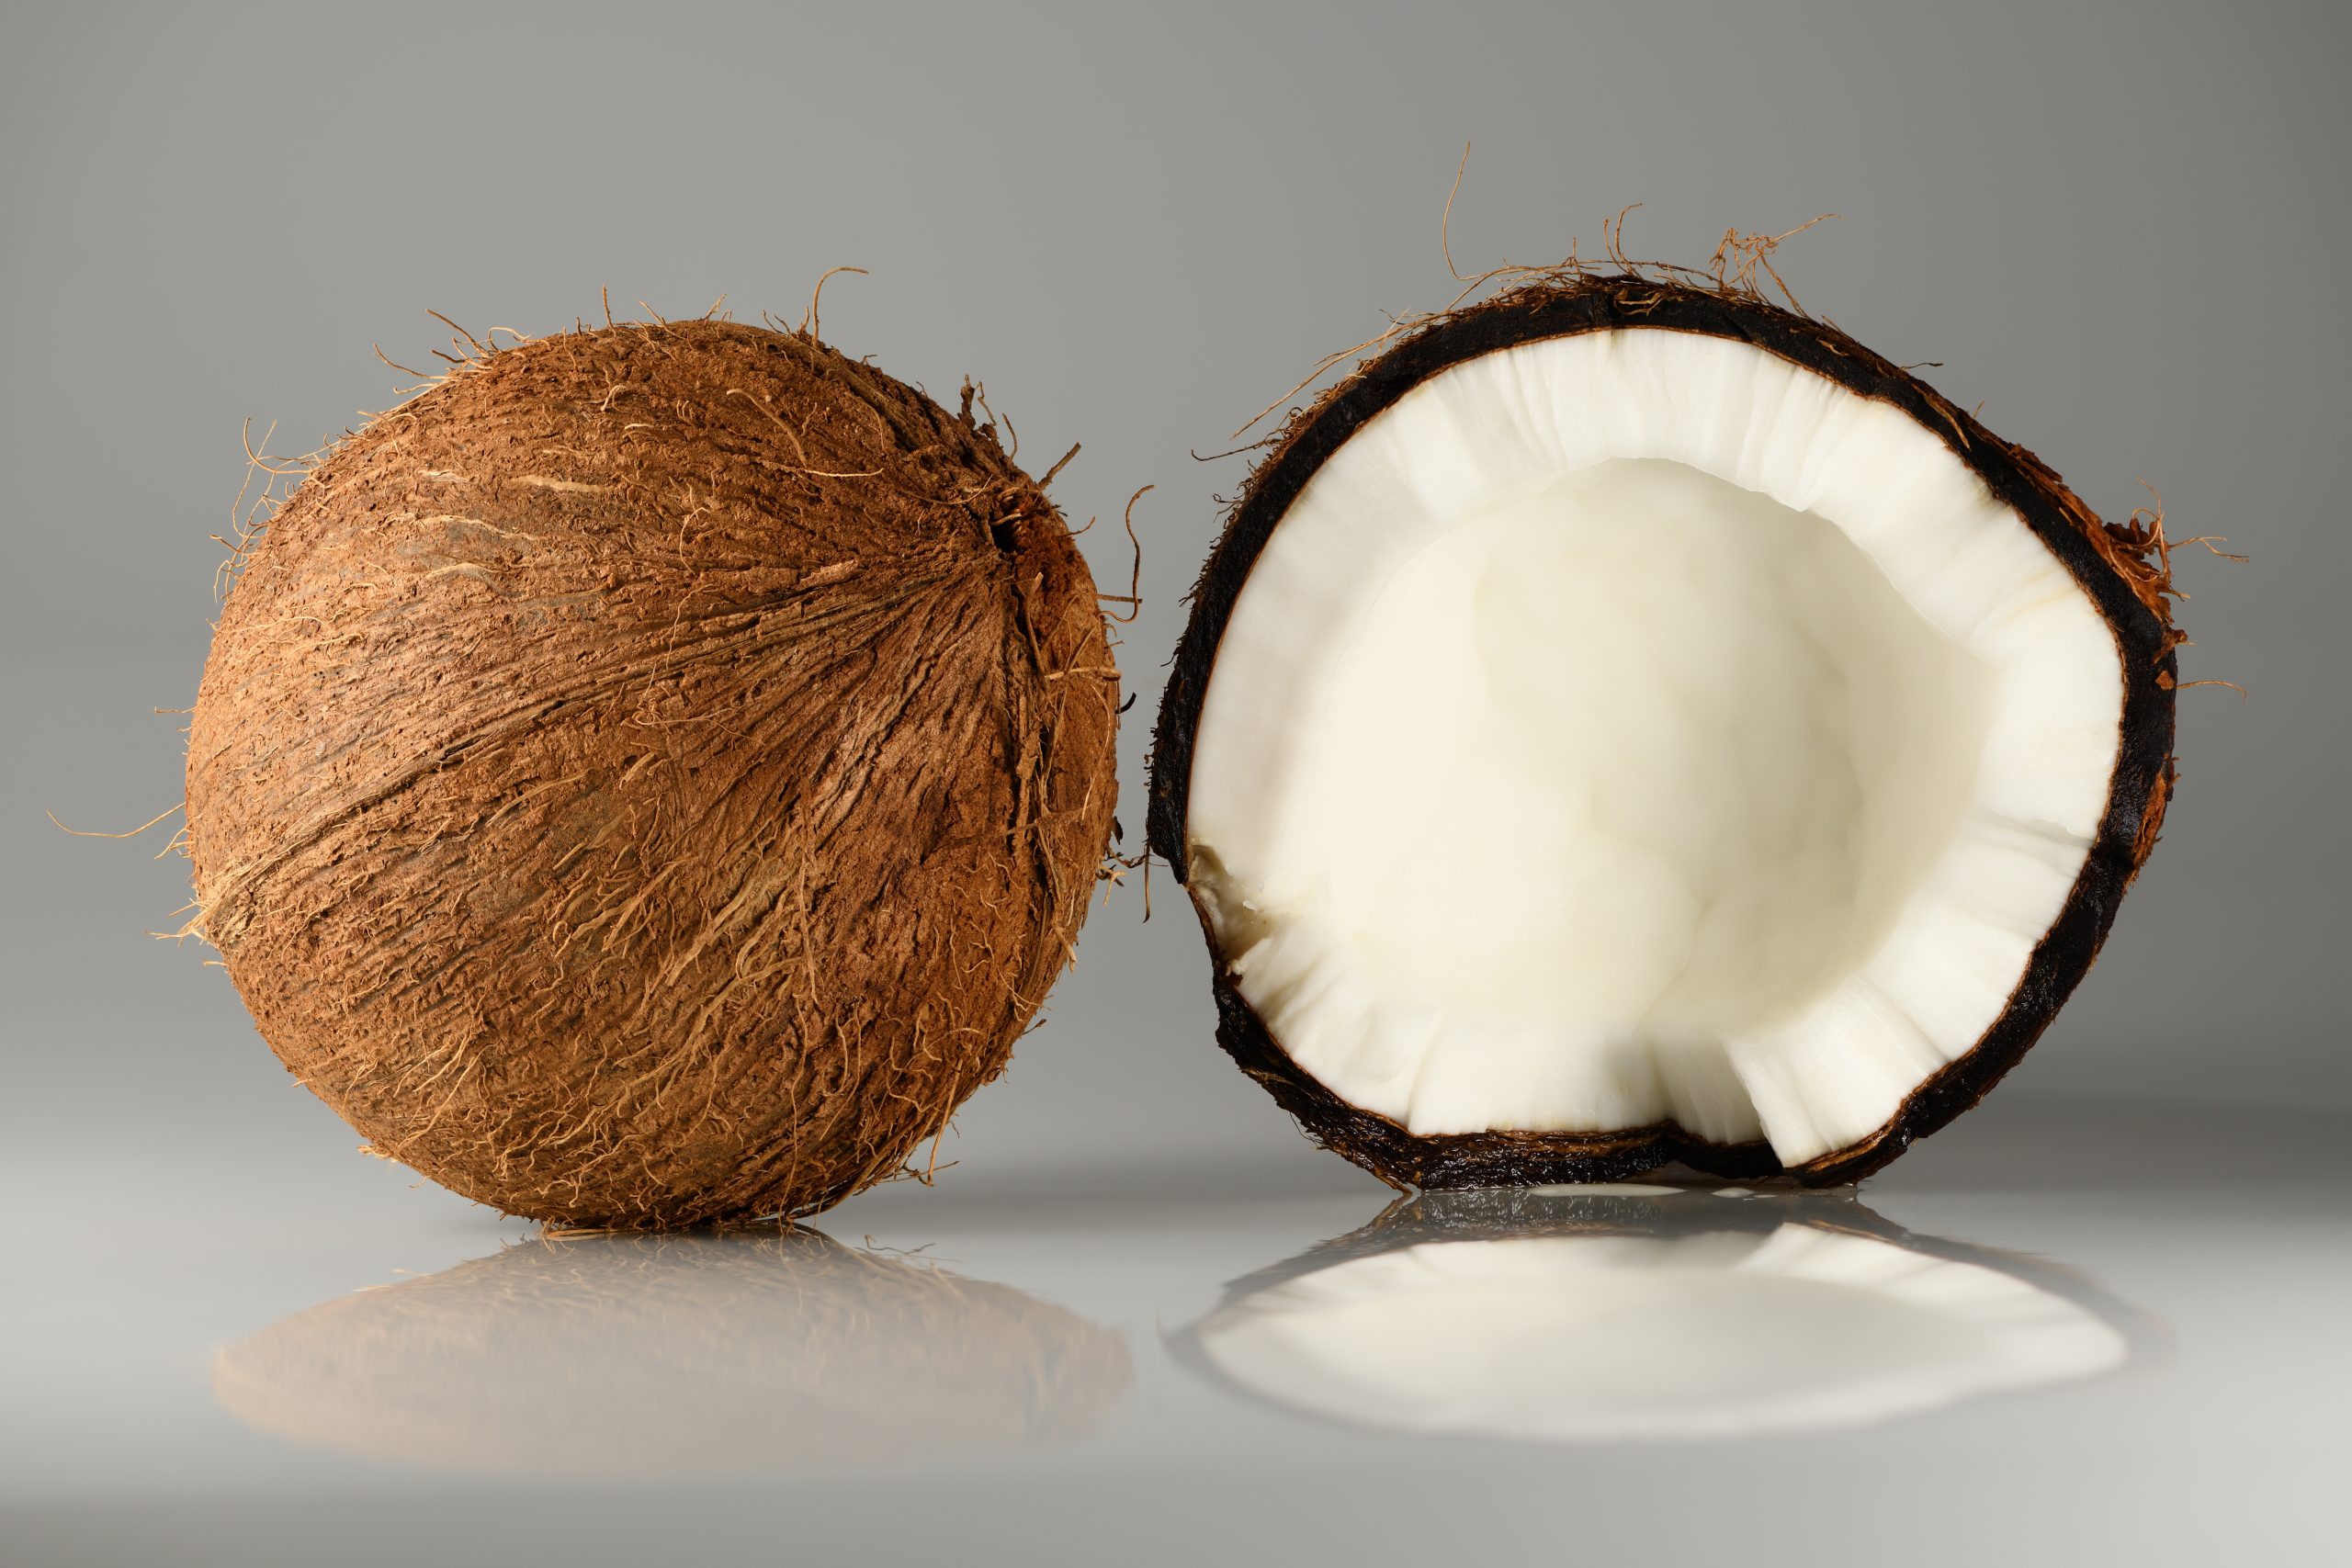 coconut cut in half, showing white cut side and brown hairy side - on grey background